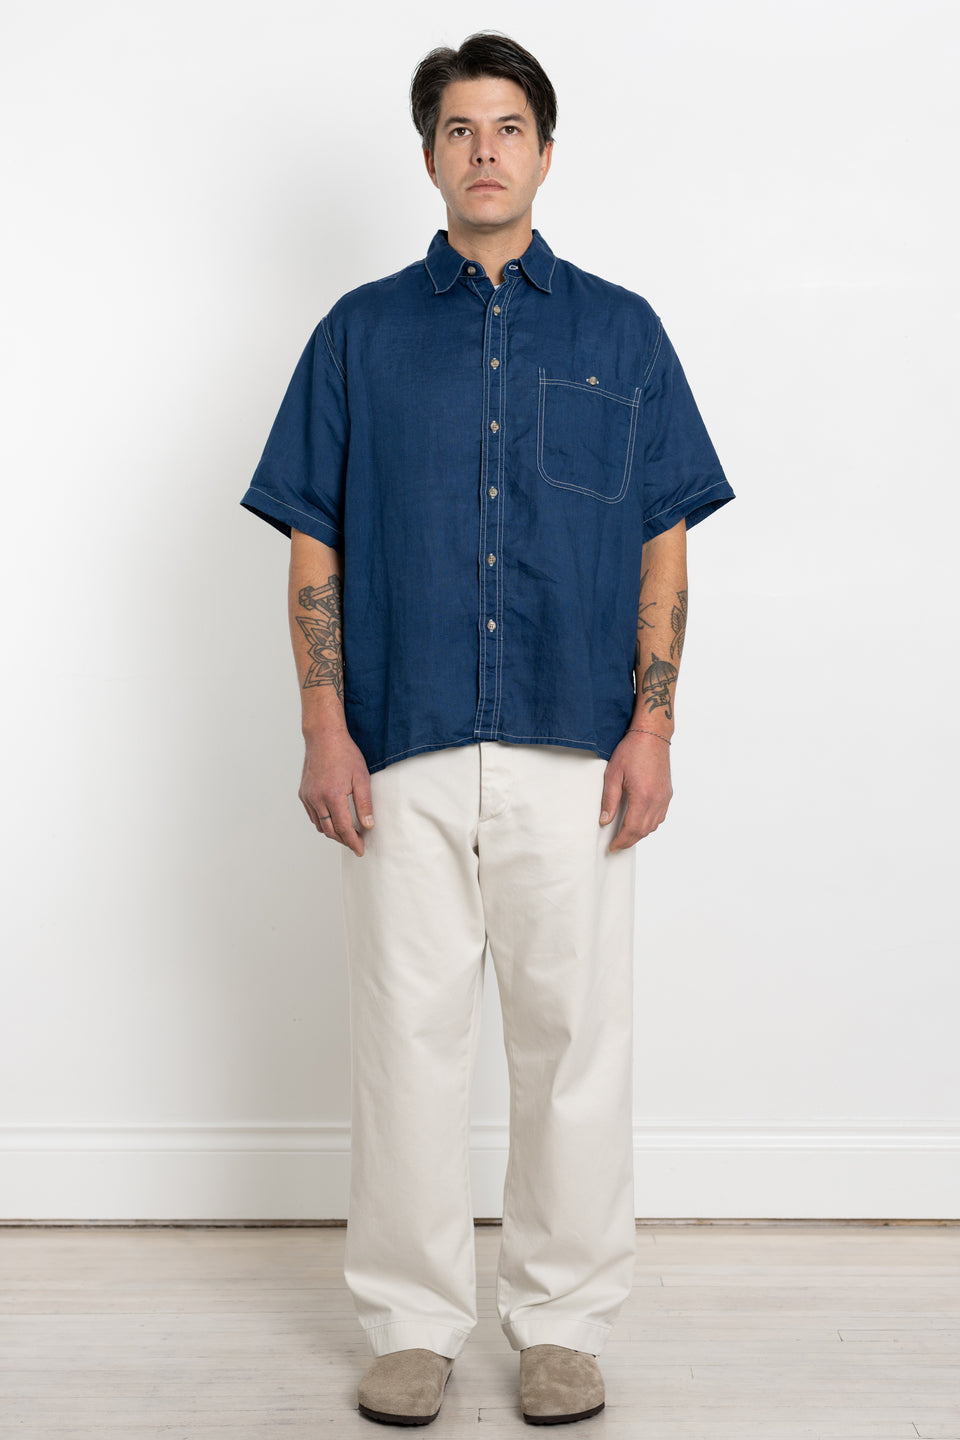 orSlow Japan 23AW FW23 Men's Collection Indigo Linen Loose Fit Short Sleeve Shirt Calculus Victoria BC Canada